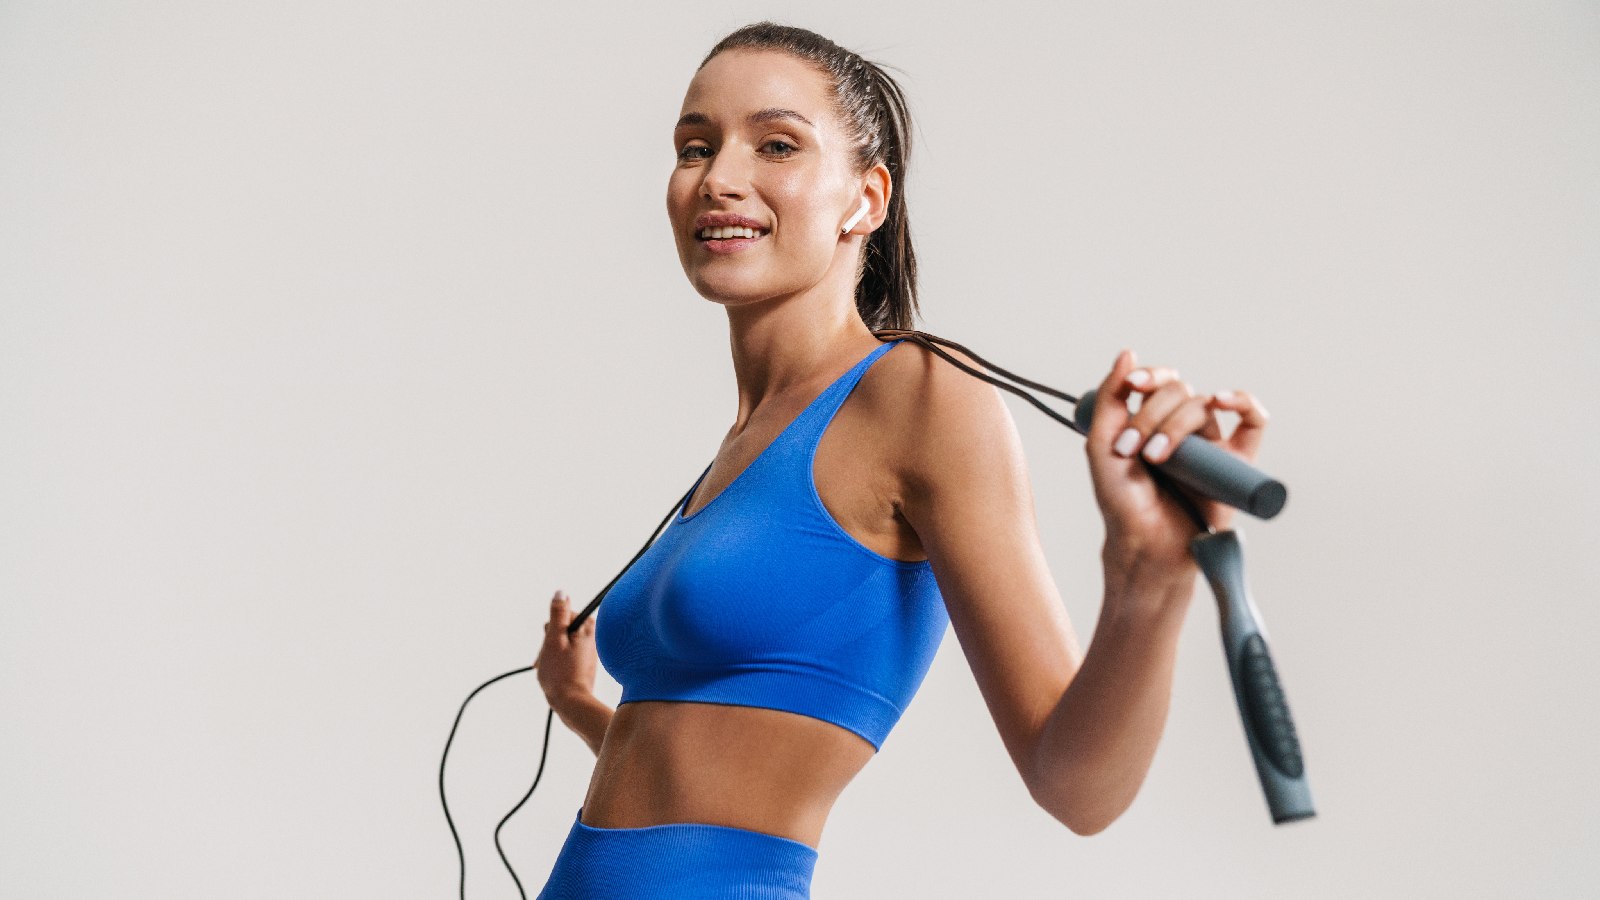 Top 5 jump ropes for weight loss in India